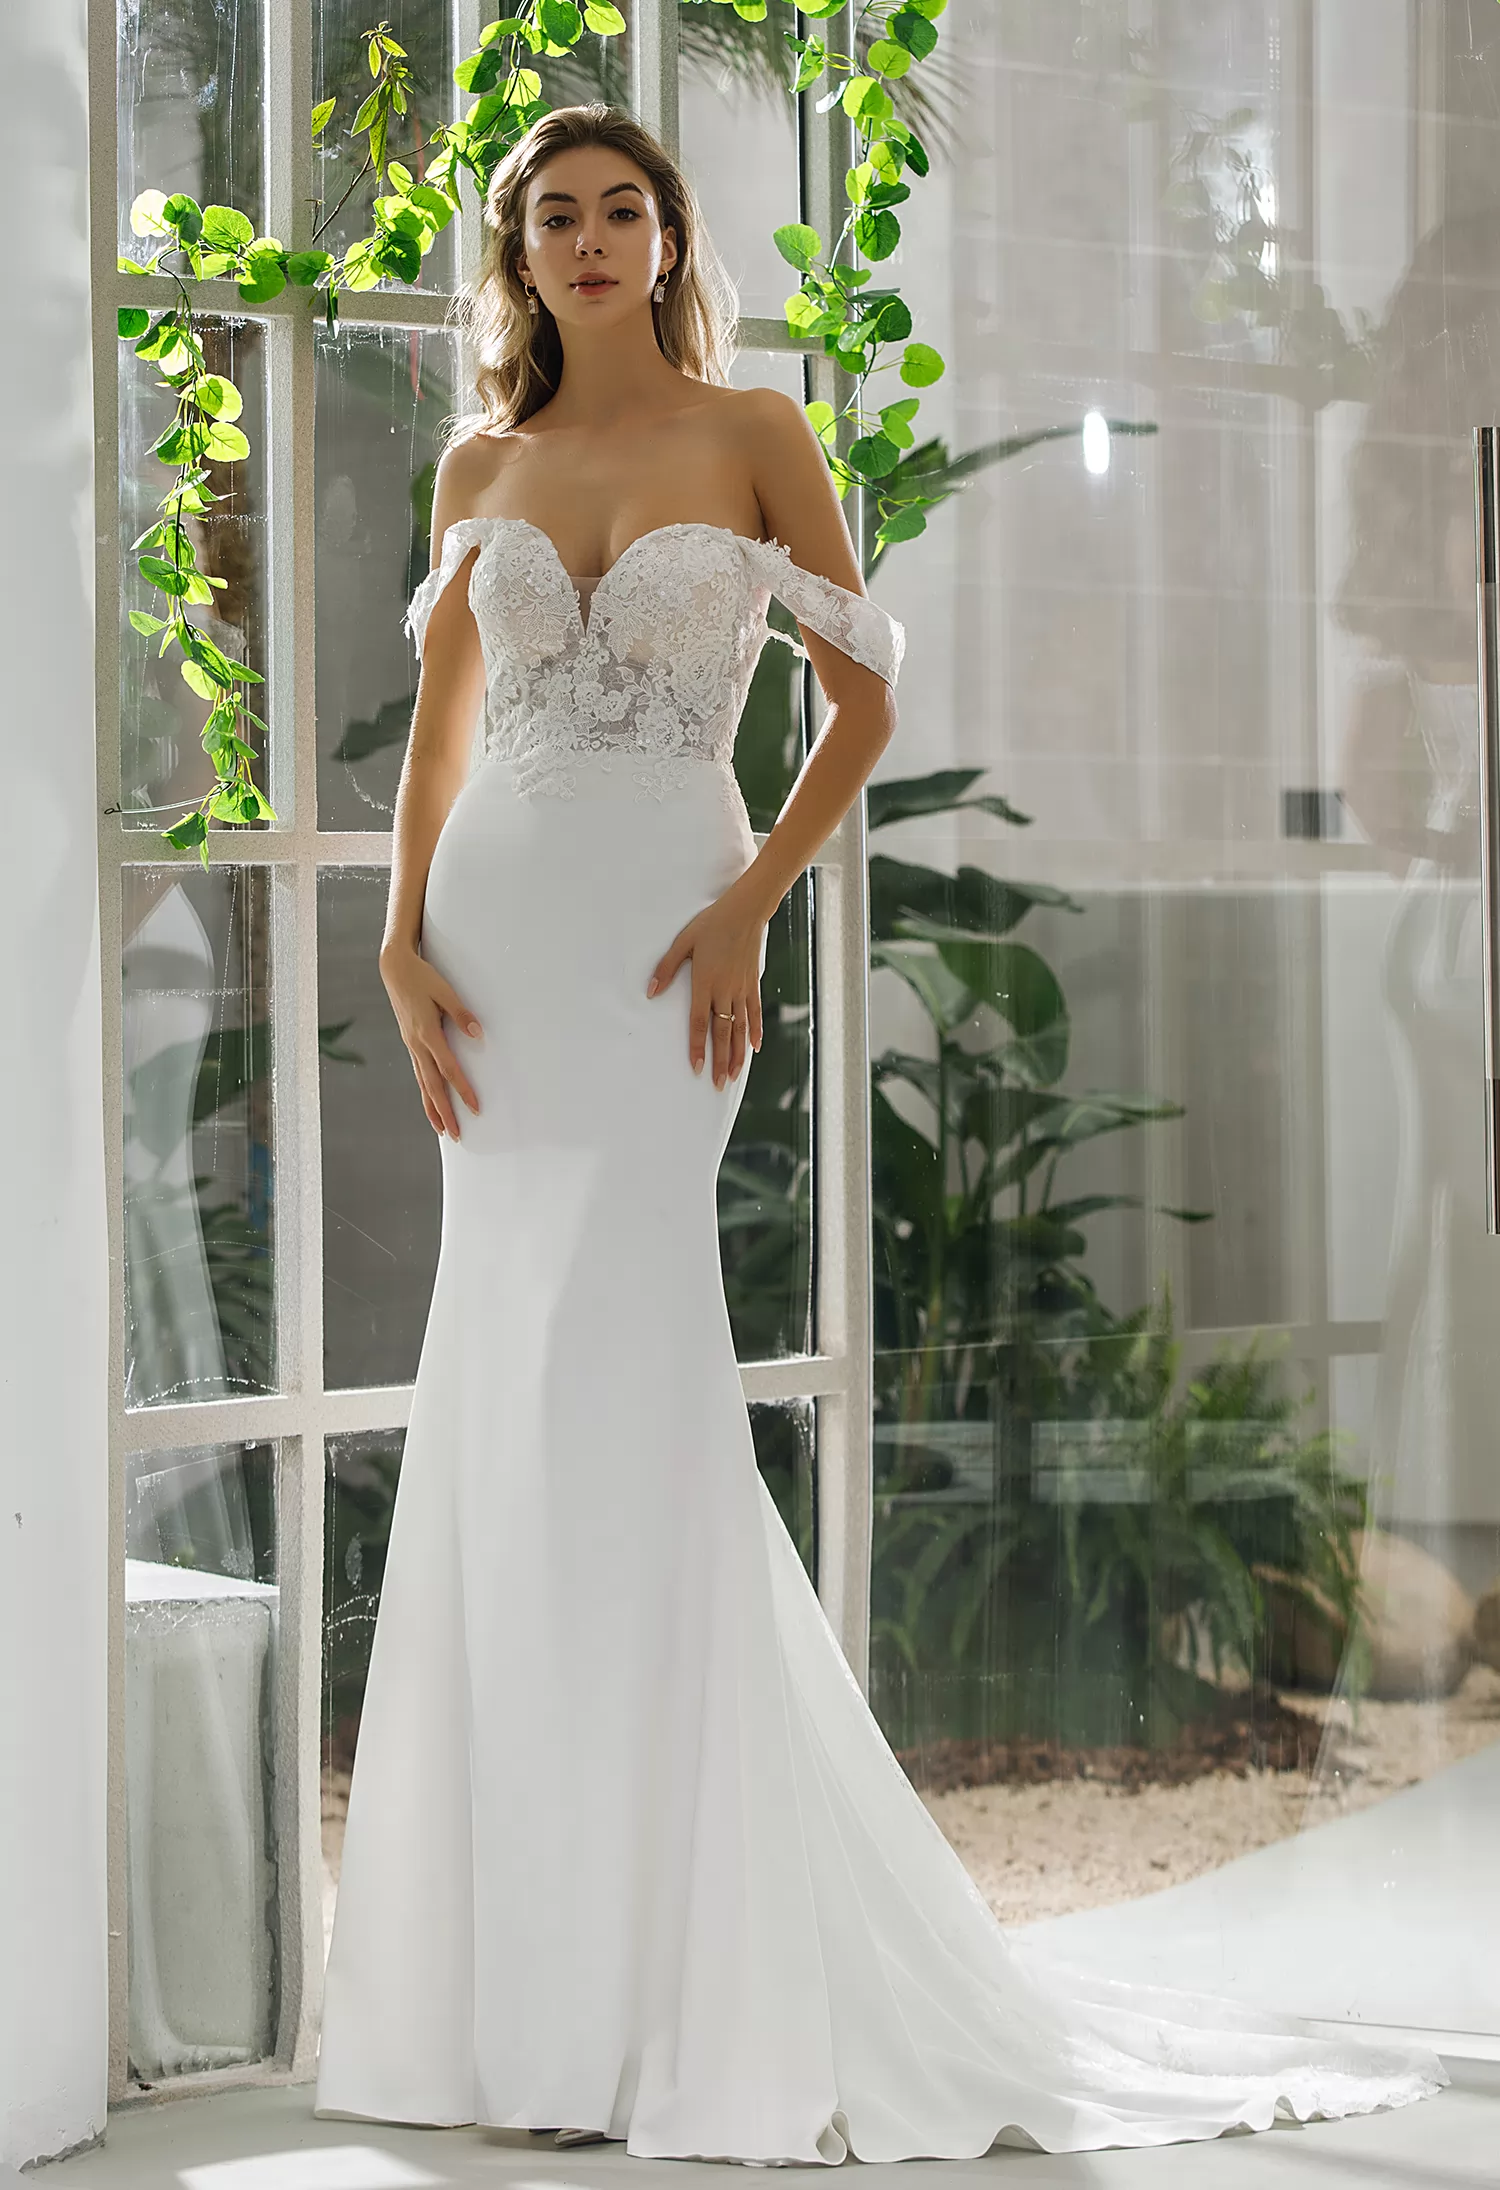 Lace Strapless Fit And Flare Wedding Dress With Off The Shoulder